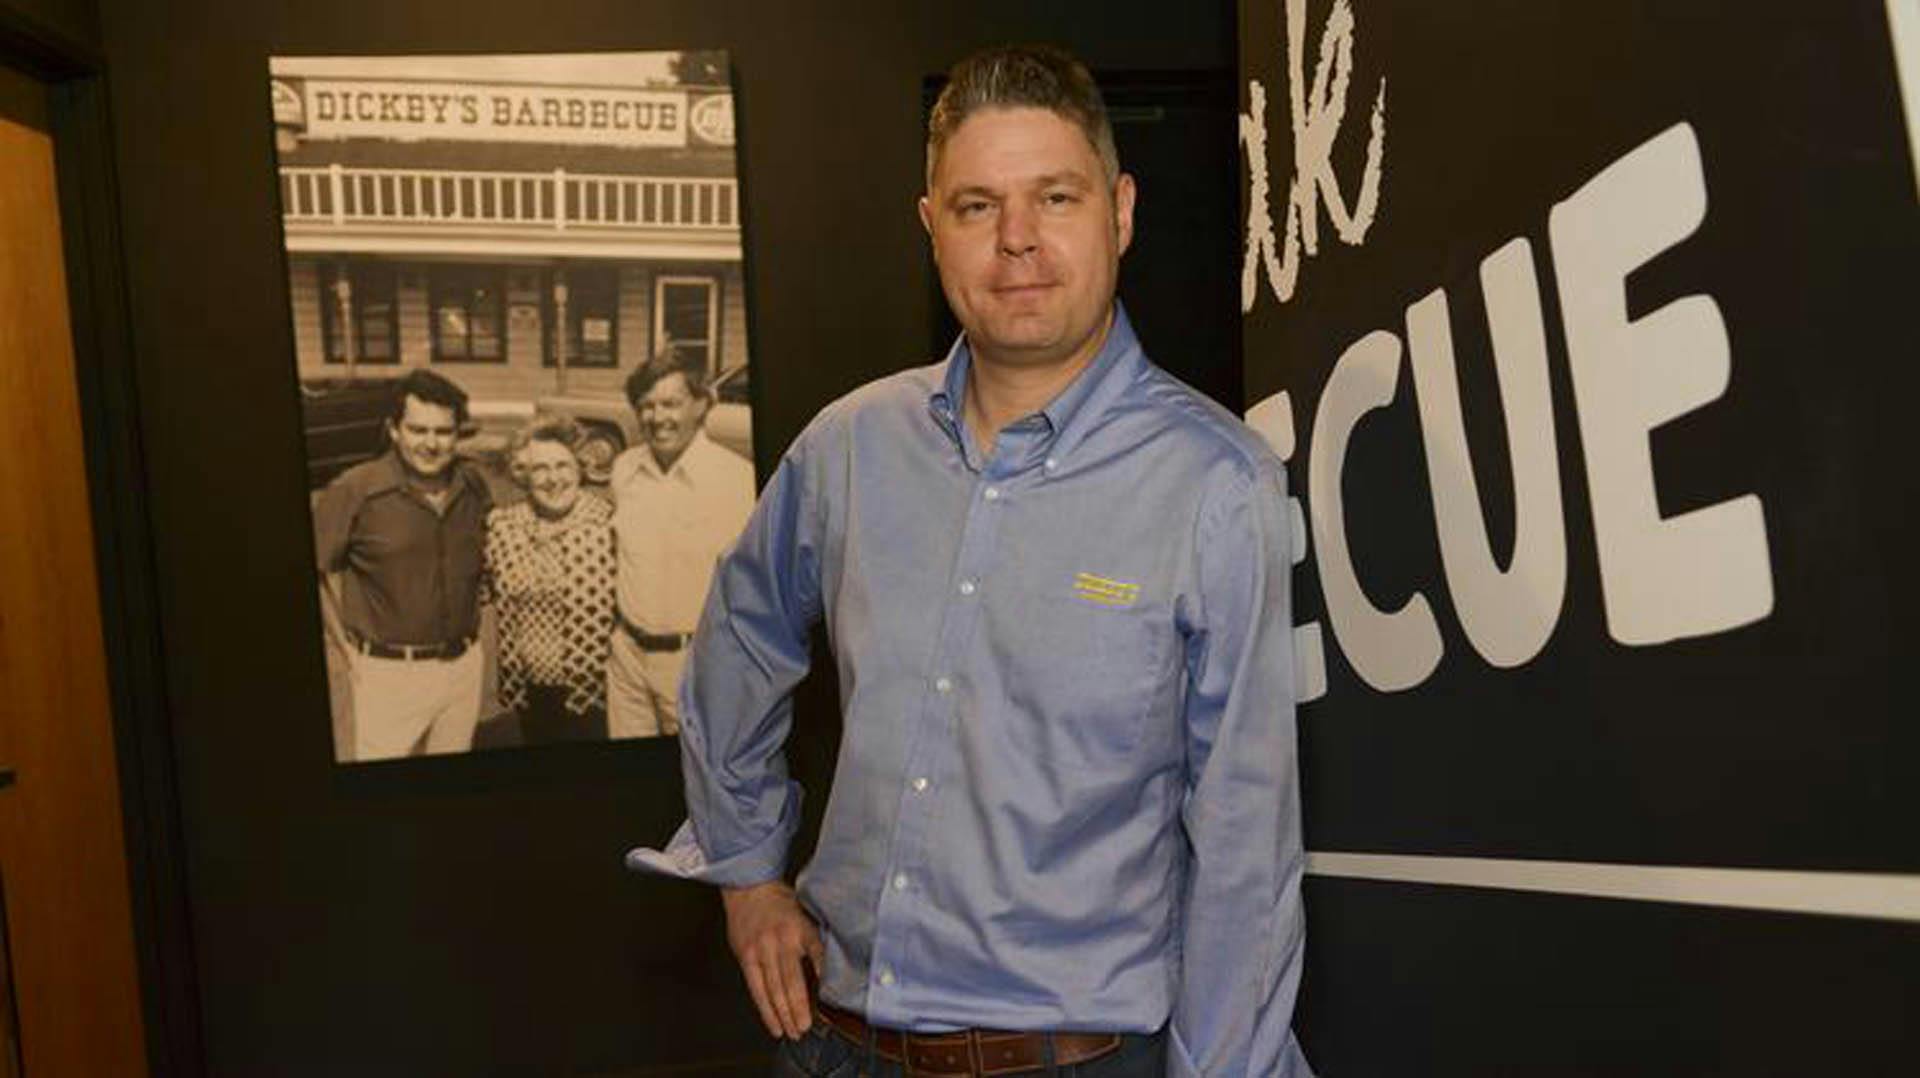 EY Recognizes Dickey’s Barbecue Restaurants, Inc. CEO Roland Dickey Jr. as Entrepreneur Of The Year® 2015 Award Winner in the Southwest Region